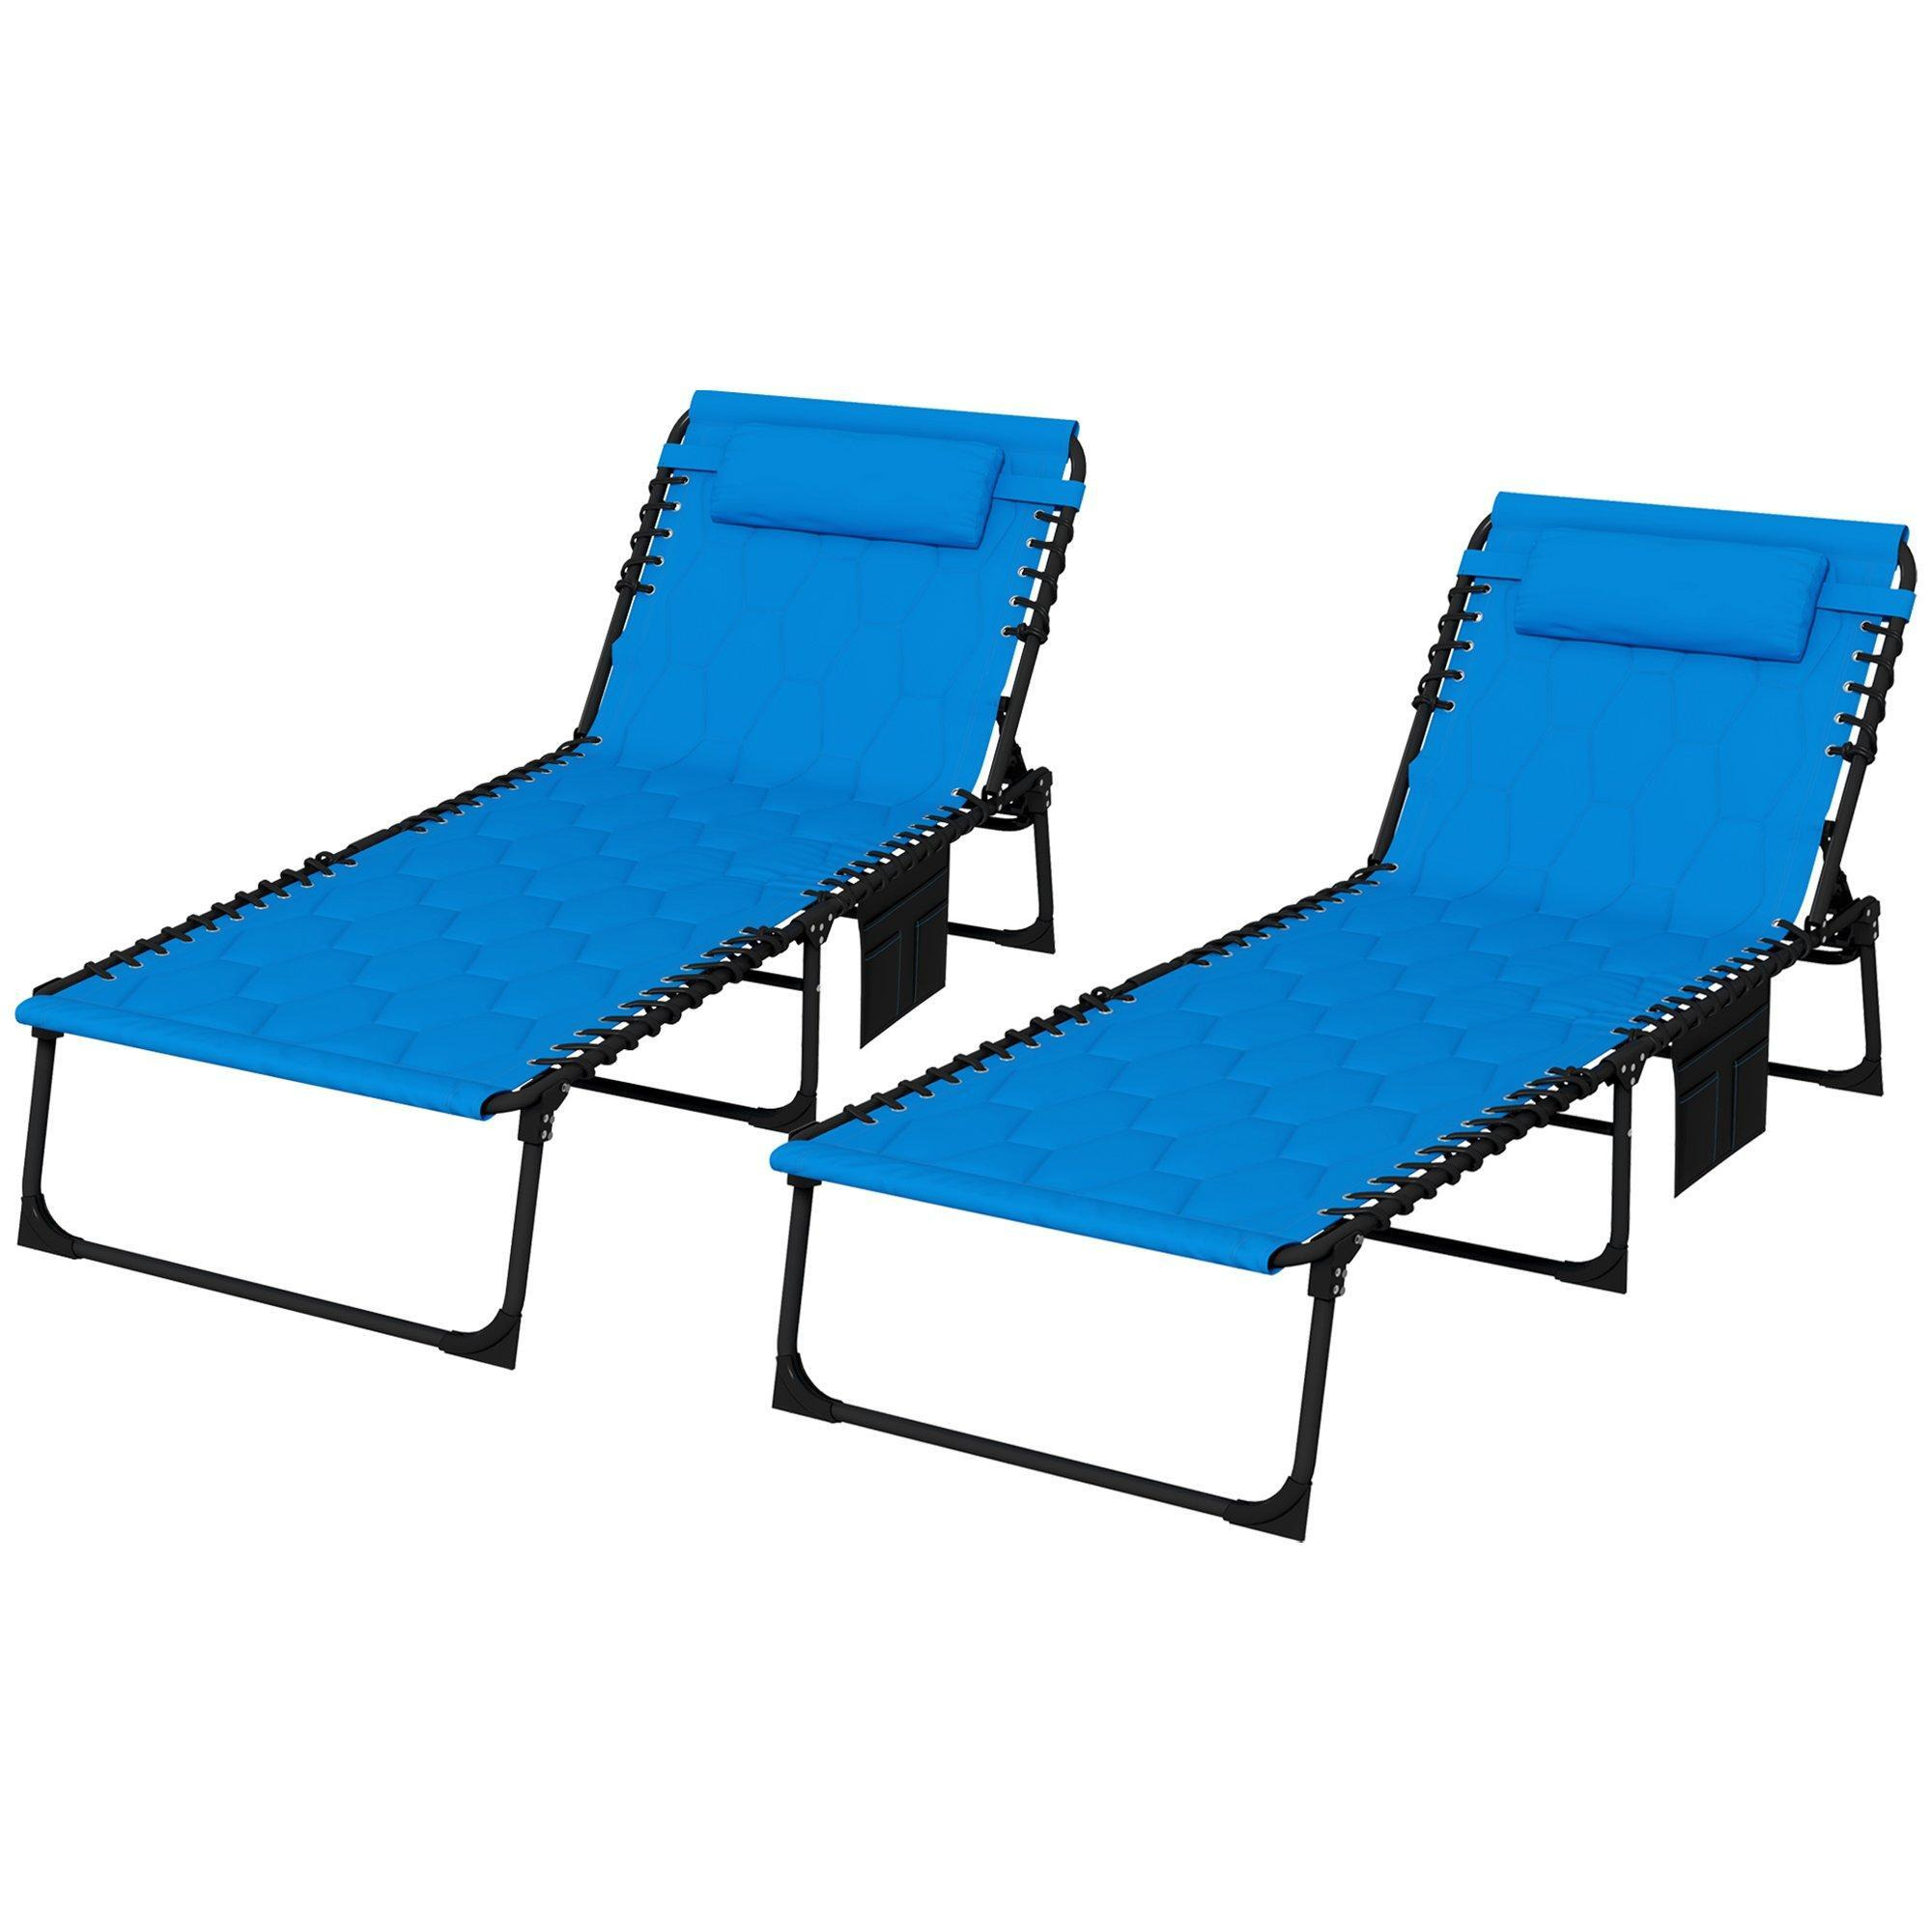 Foldable Sun Lounger Set with Reclining Back, Outdoor Lounger with Padded Seat - image 1